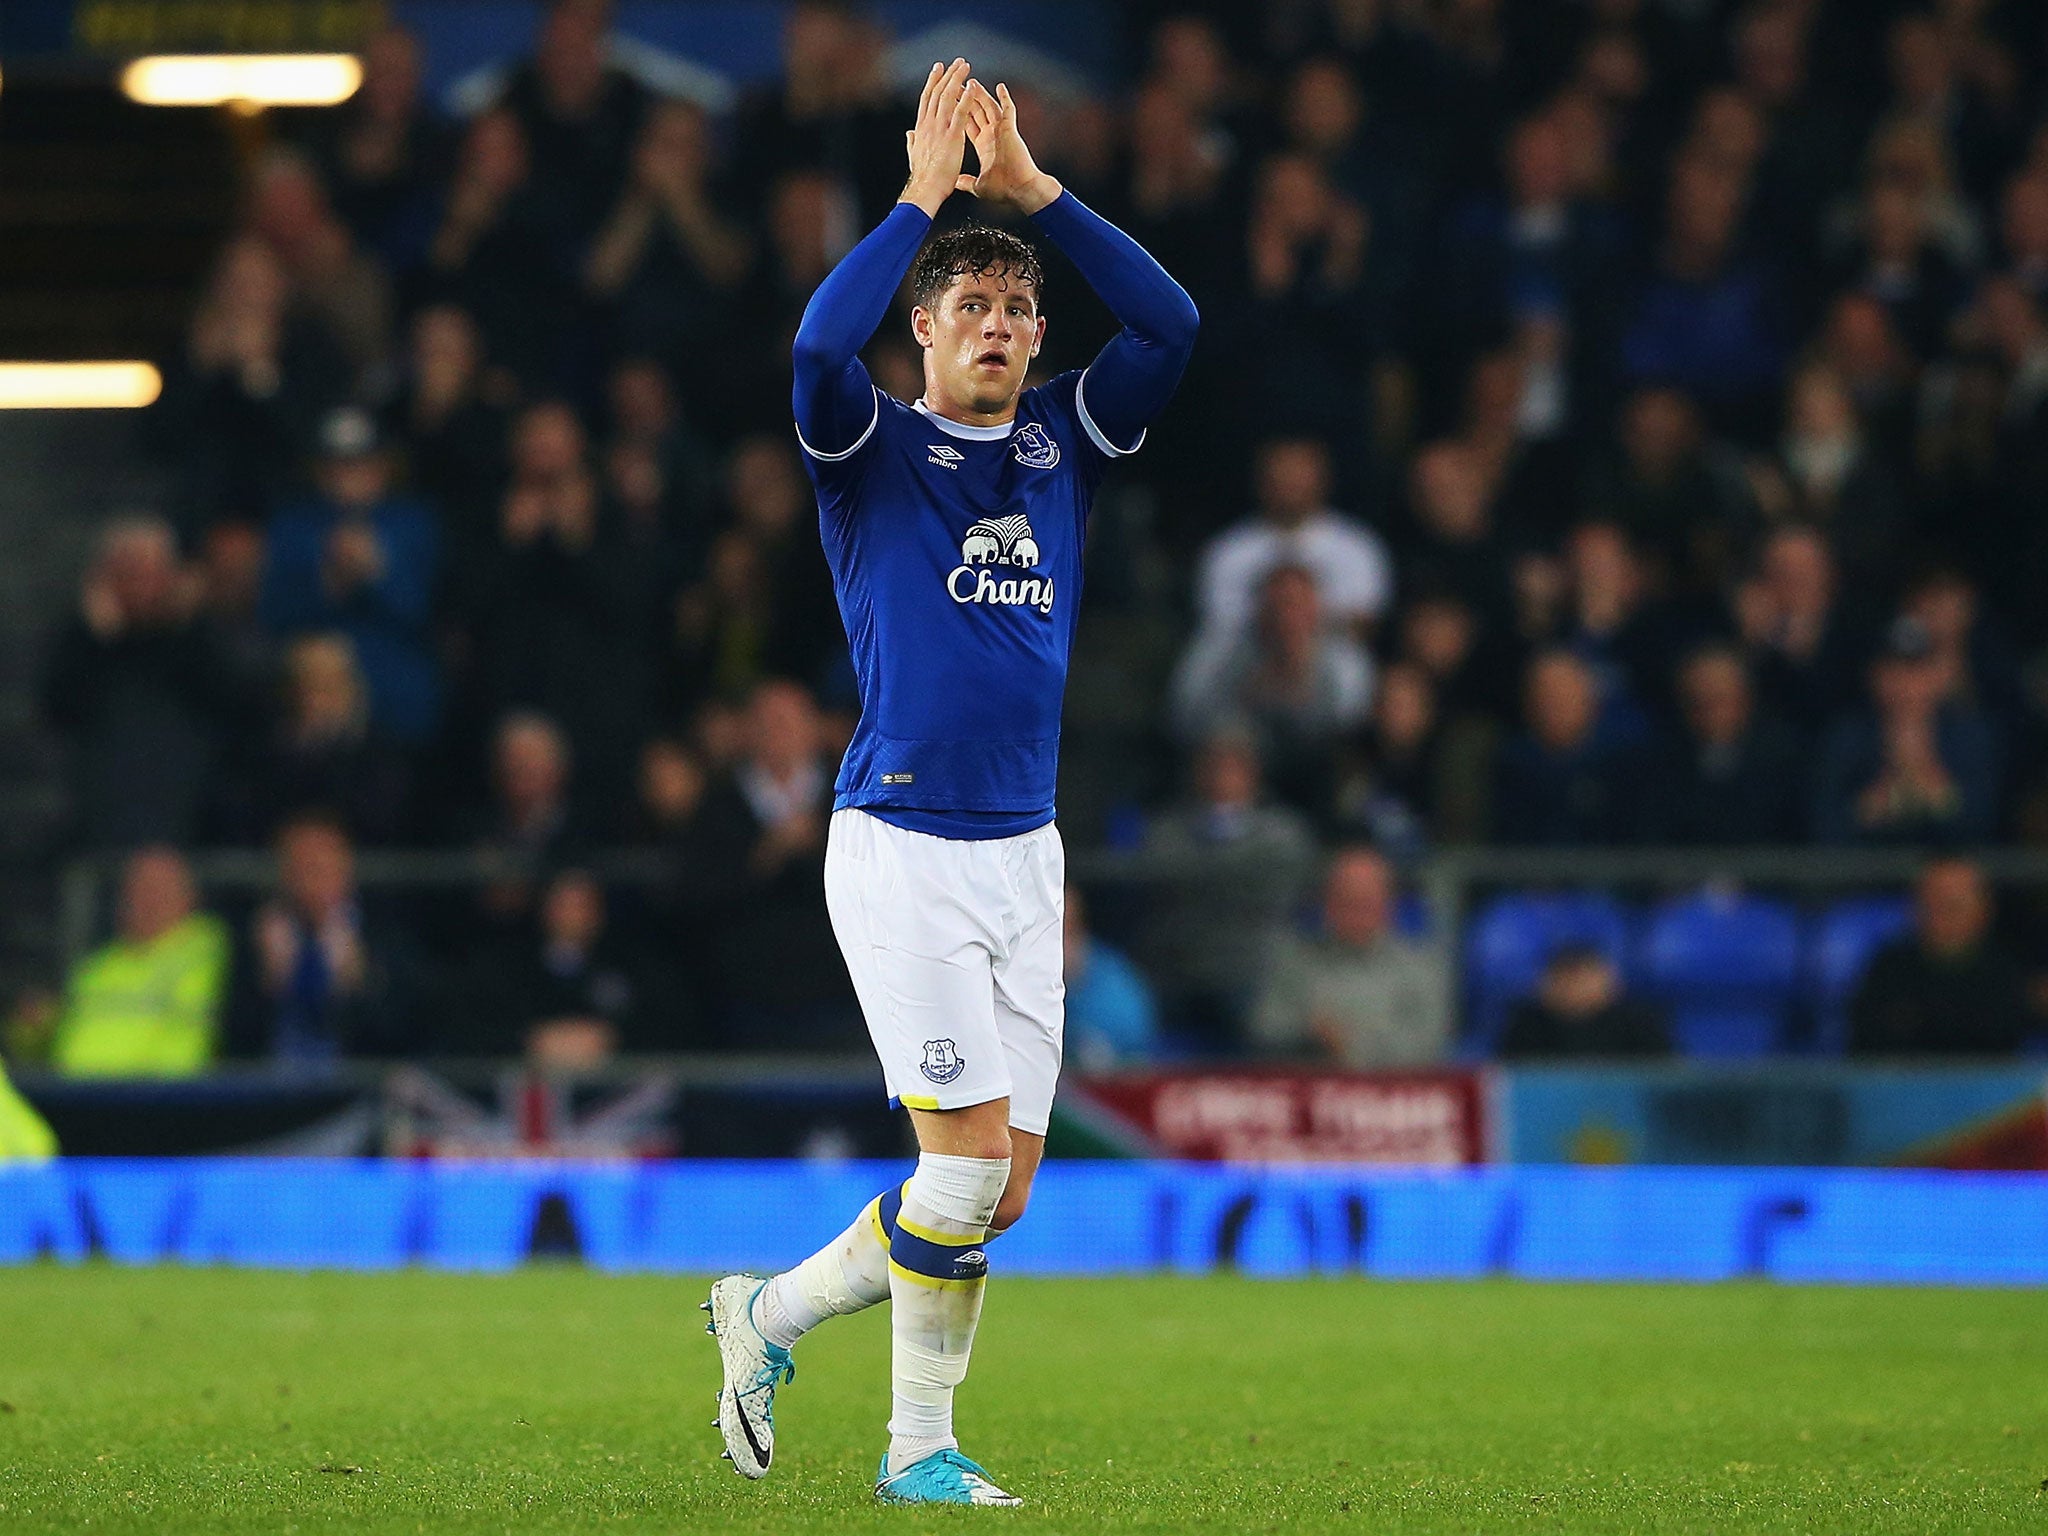 Ross Barkley is being targeted by Chelsea in his bid to leave Everton